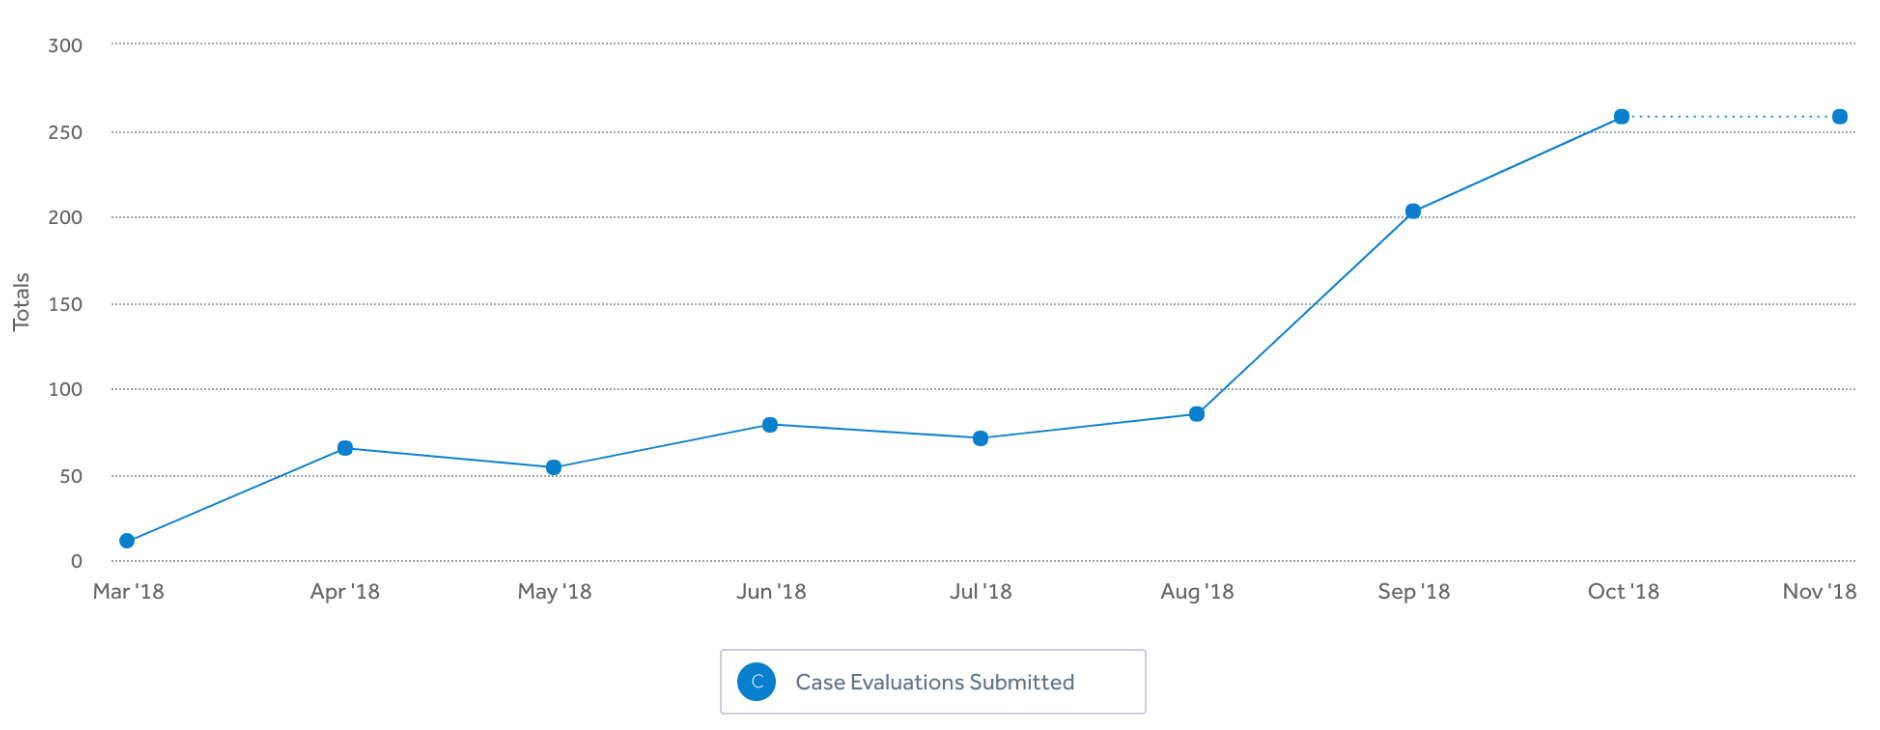 Chart showing increase in case evaluations